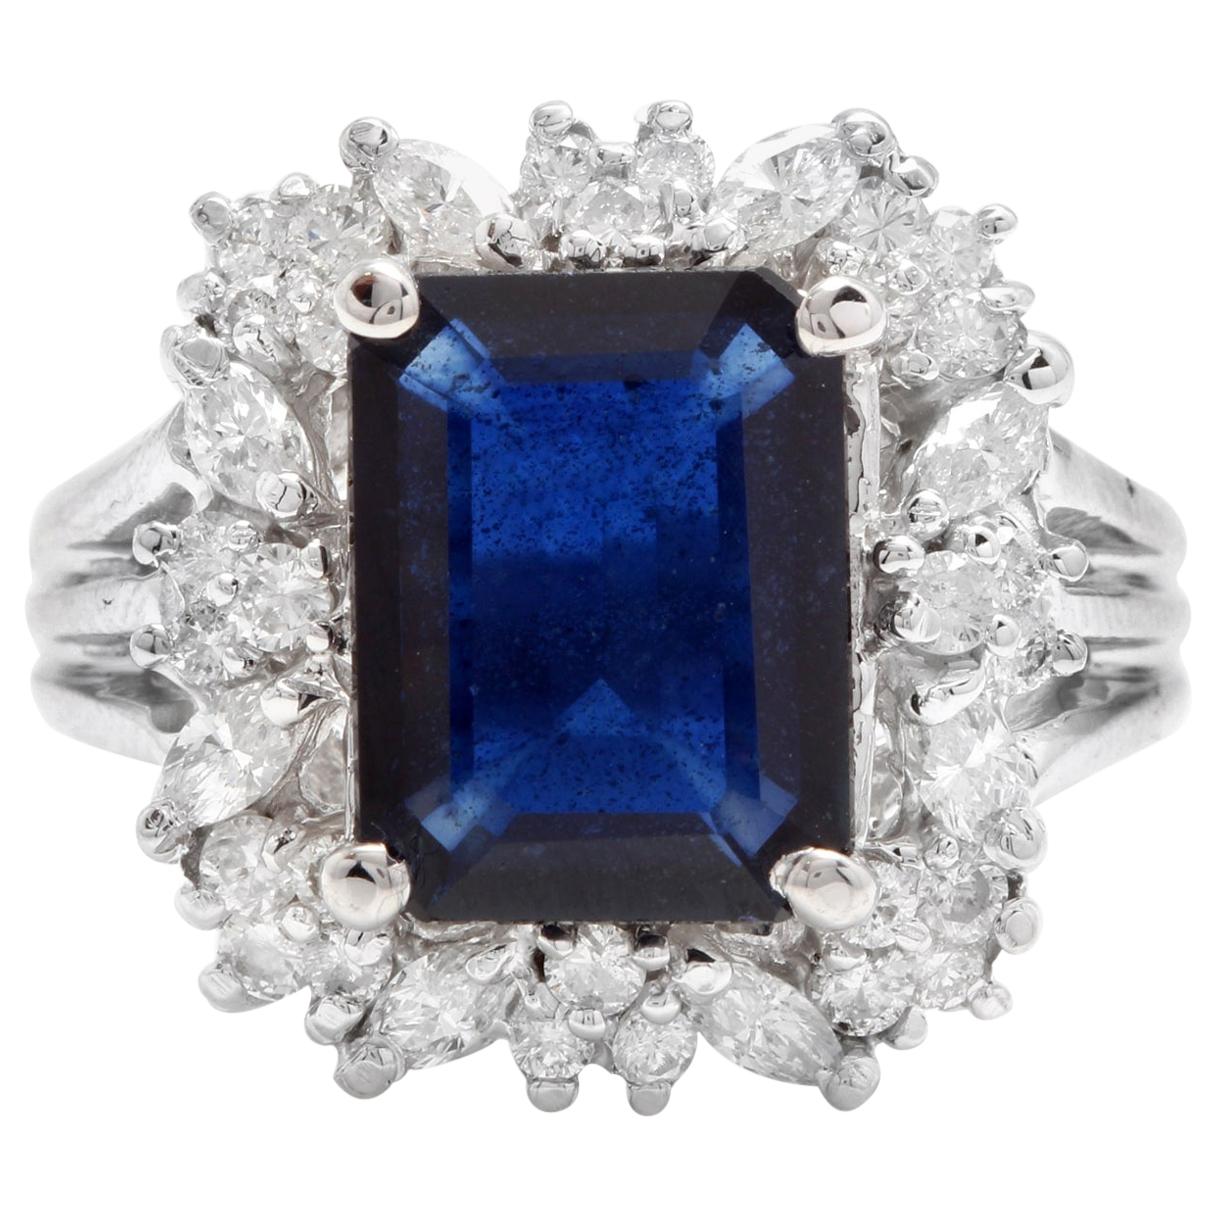 9.30 Carat Exquisite Natural Blue Sapphire and Diamond 14 Karat Solid White Gold